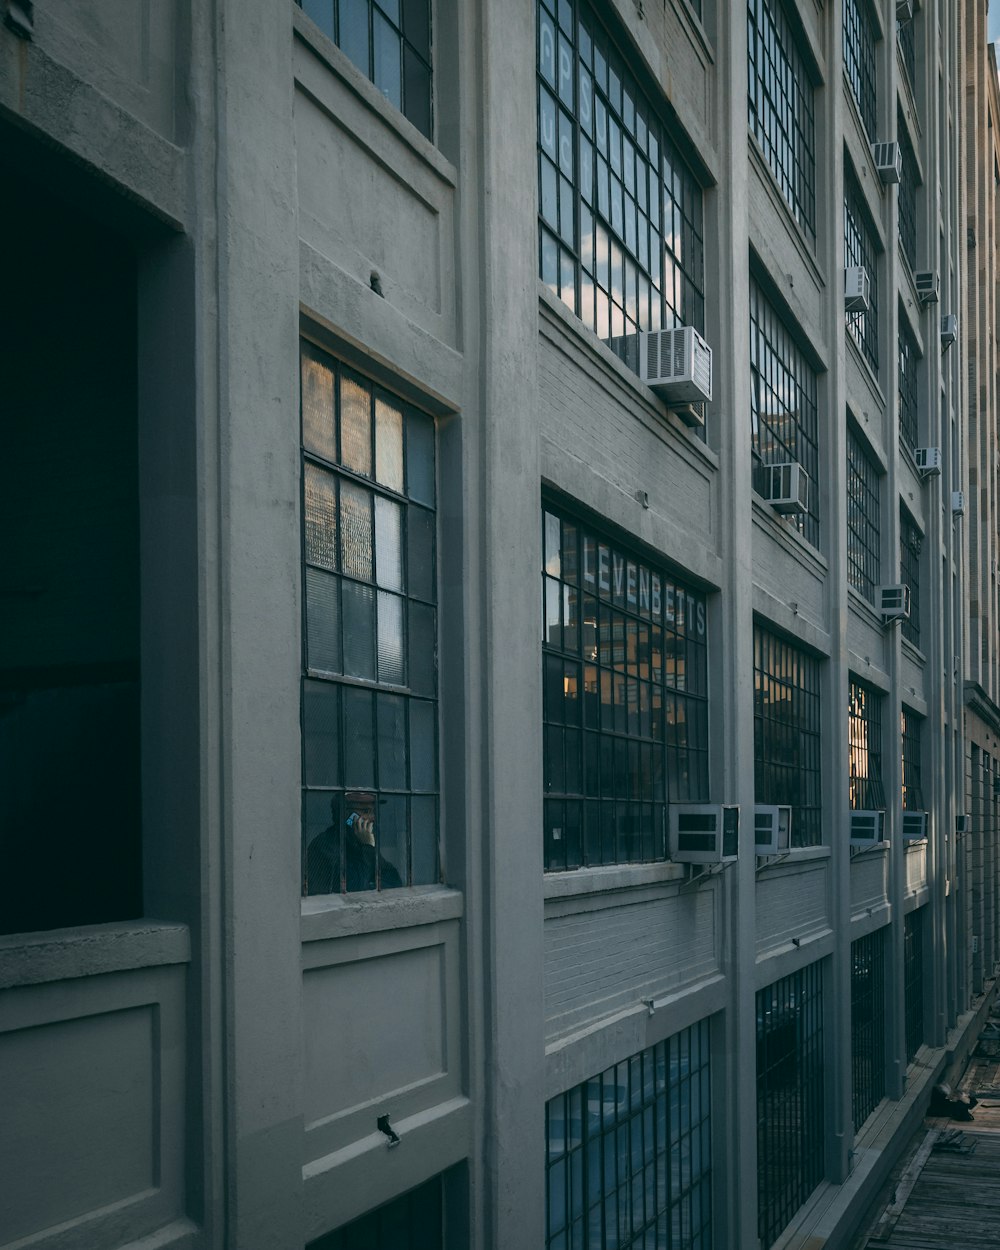 a building with many windows and bars on the side of it